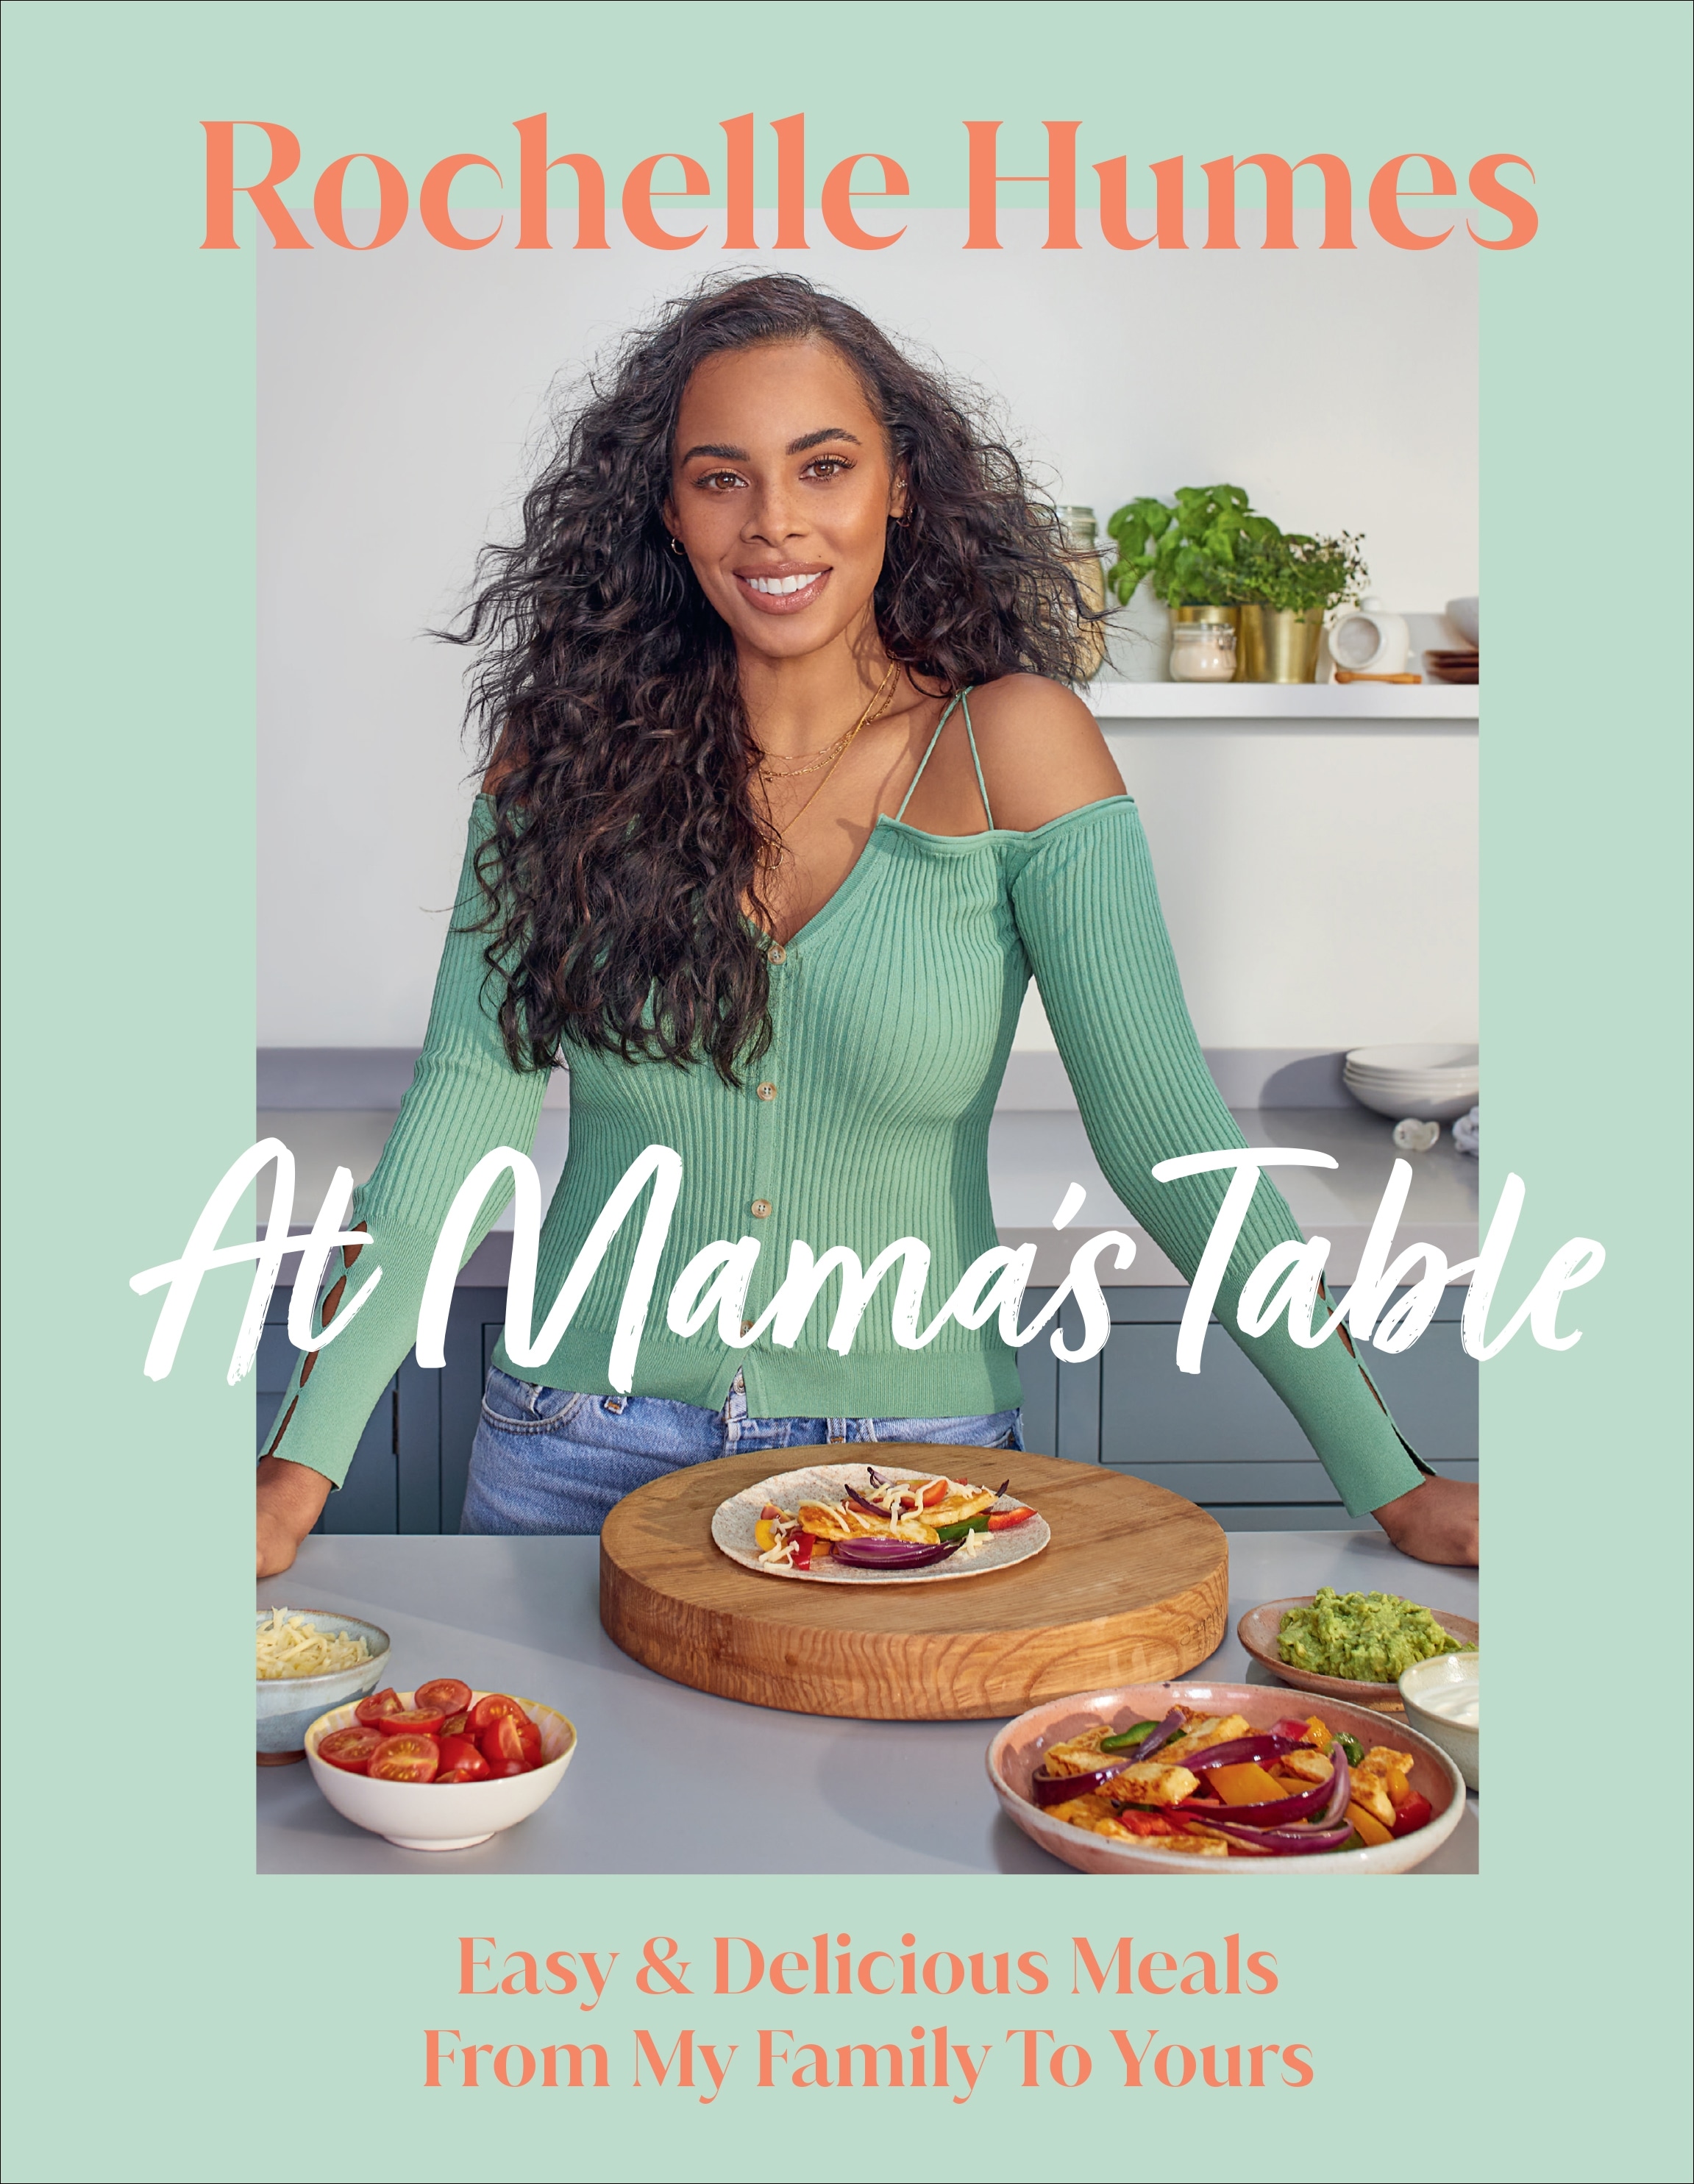 Book “At Mama’s Table” by Rochelle Humes — October 14, 2021